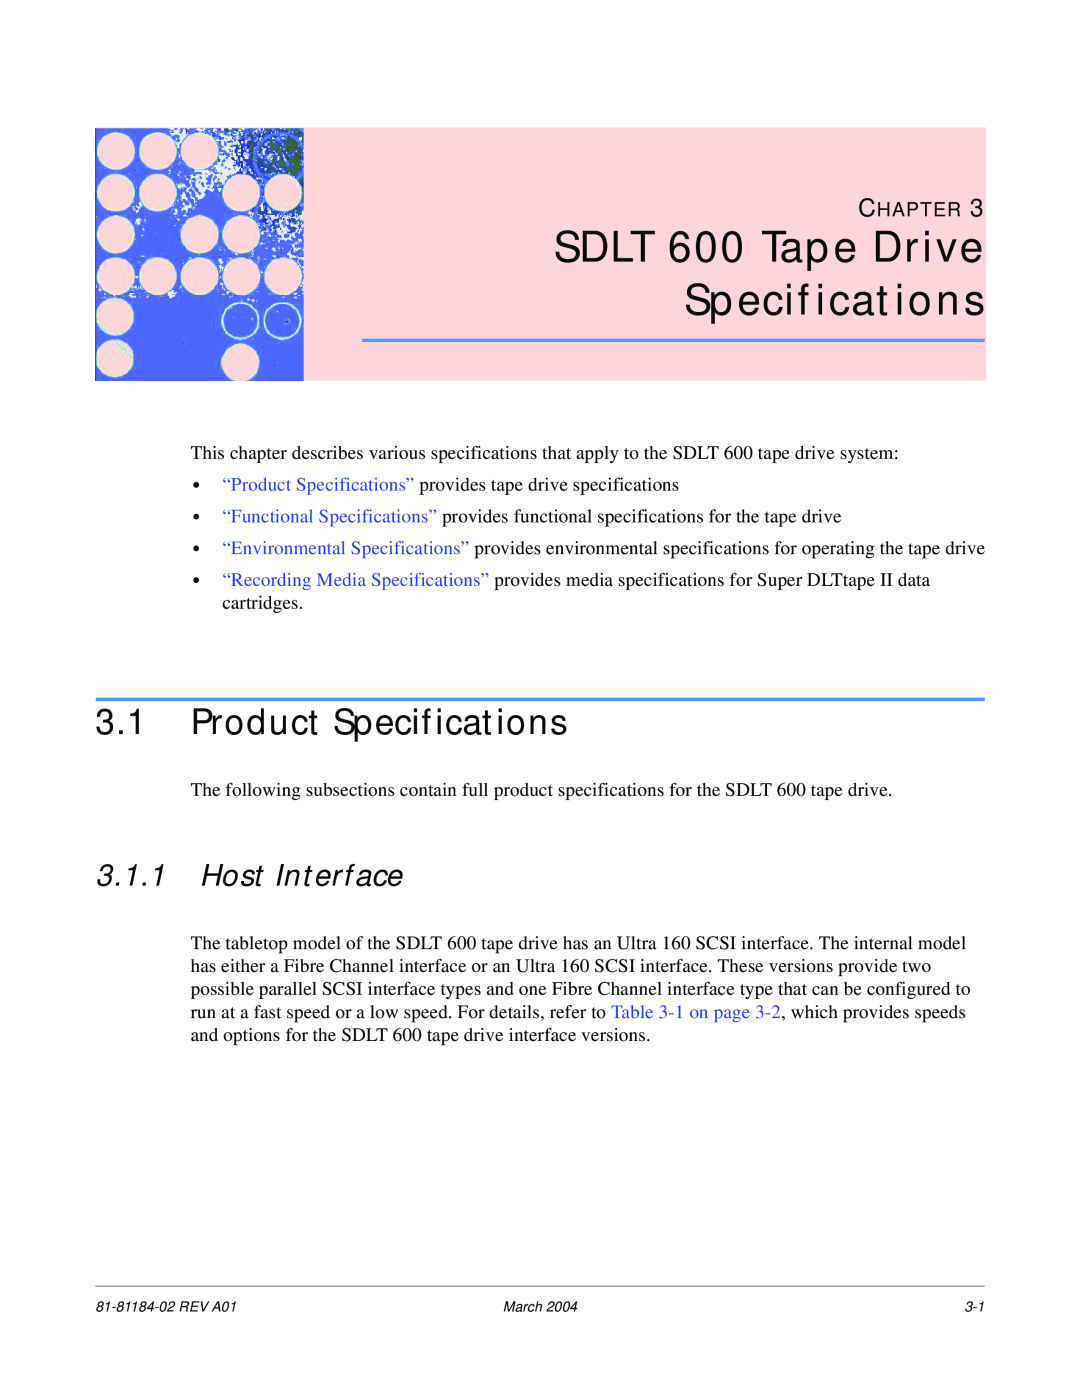 Tandberg Data manual SDLT 600 Tape Drive Specifications, Product Specifications, Host Interface, Chapter 